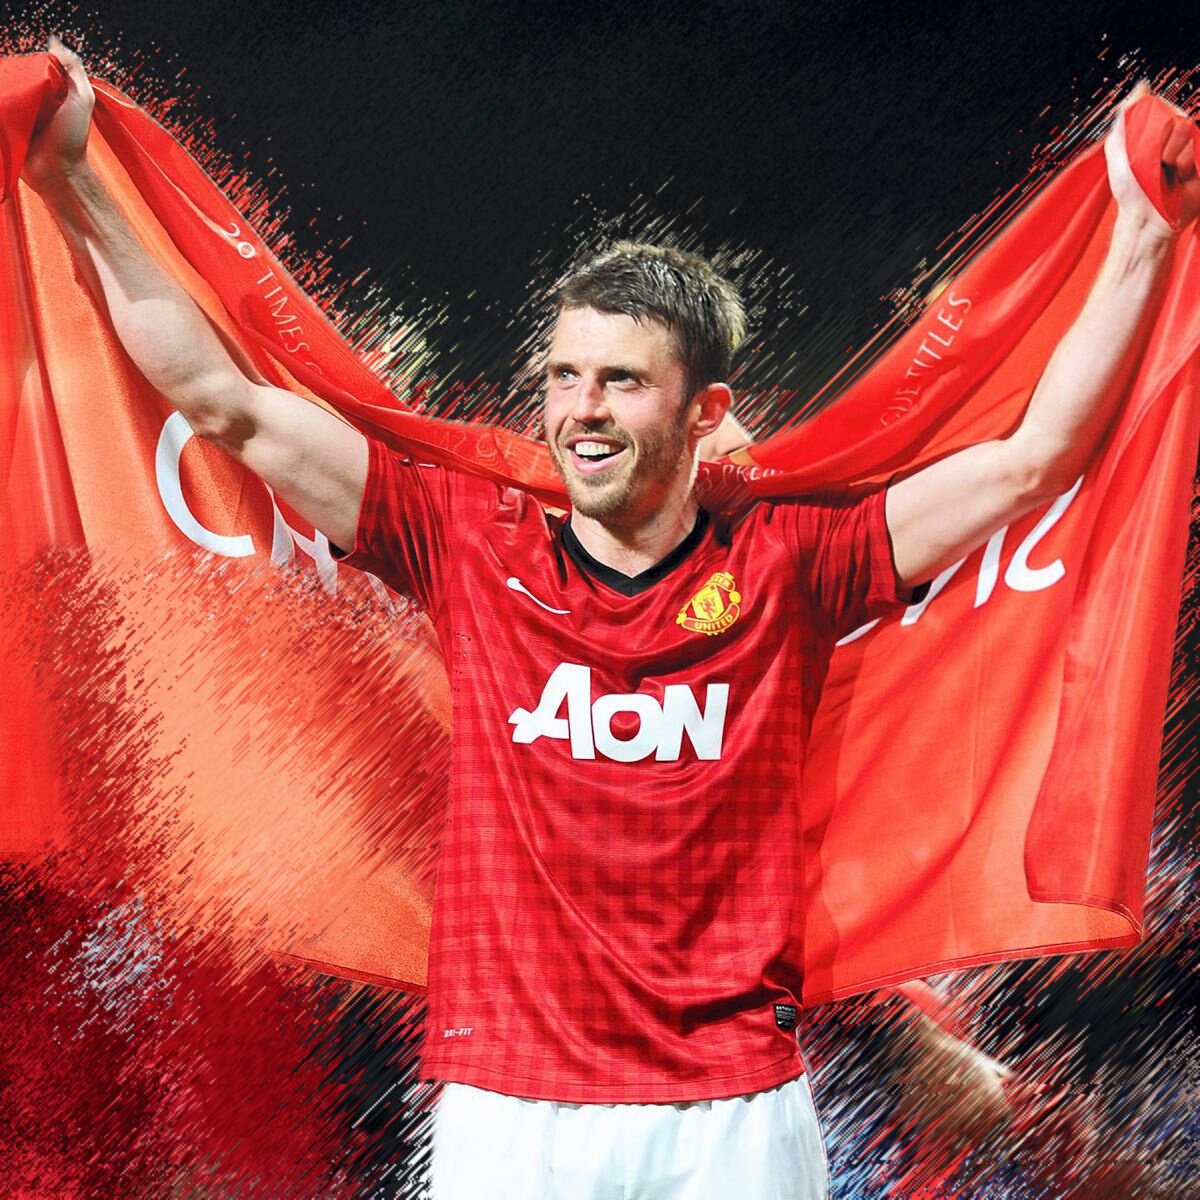 Happy 40th birthday Michael Carrick.

Describe his Manchester United career with just one word  